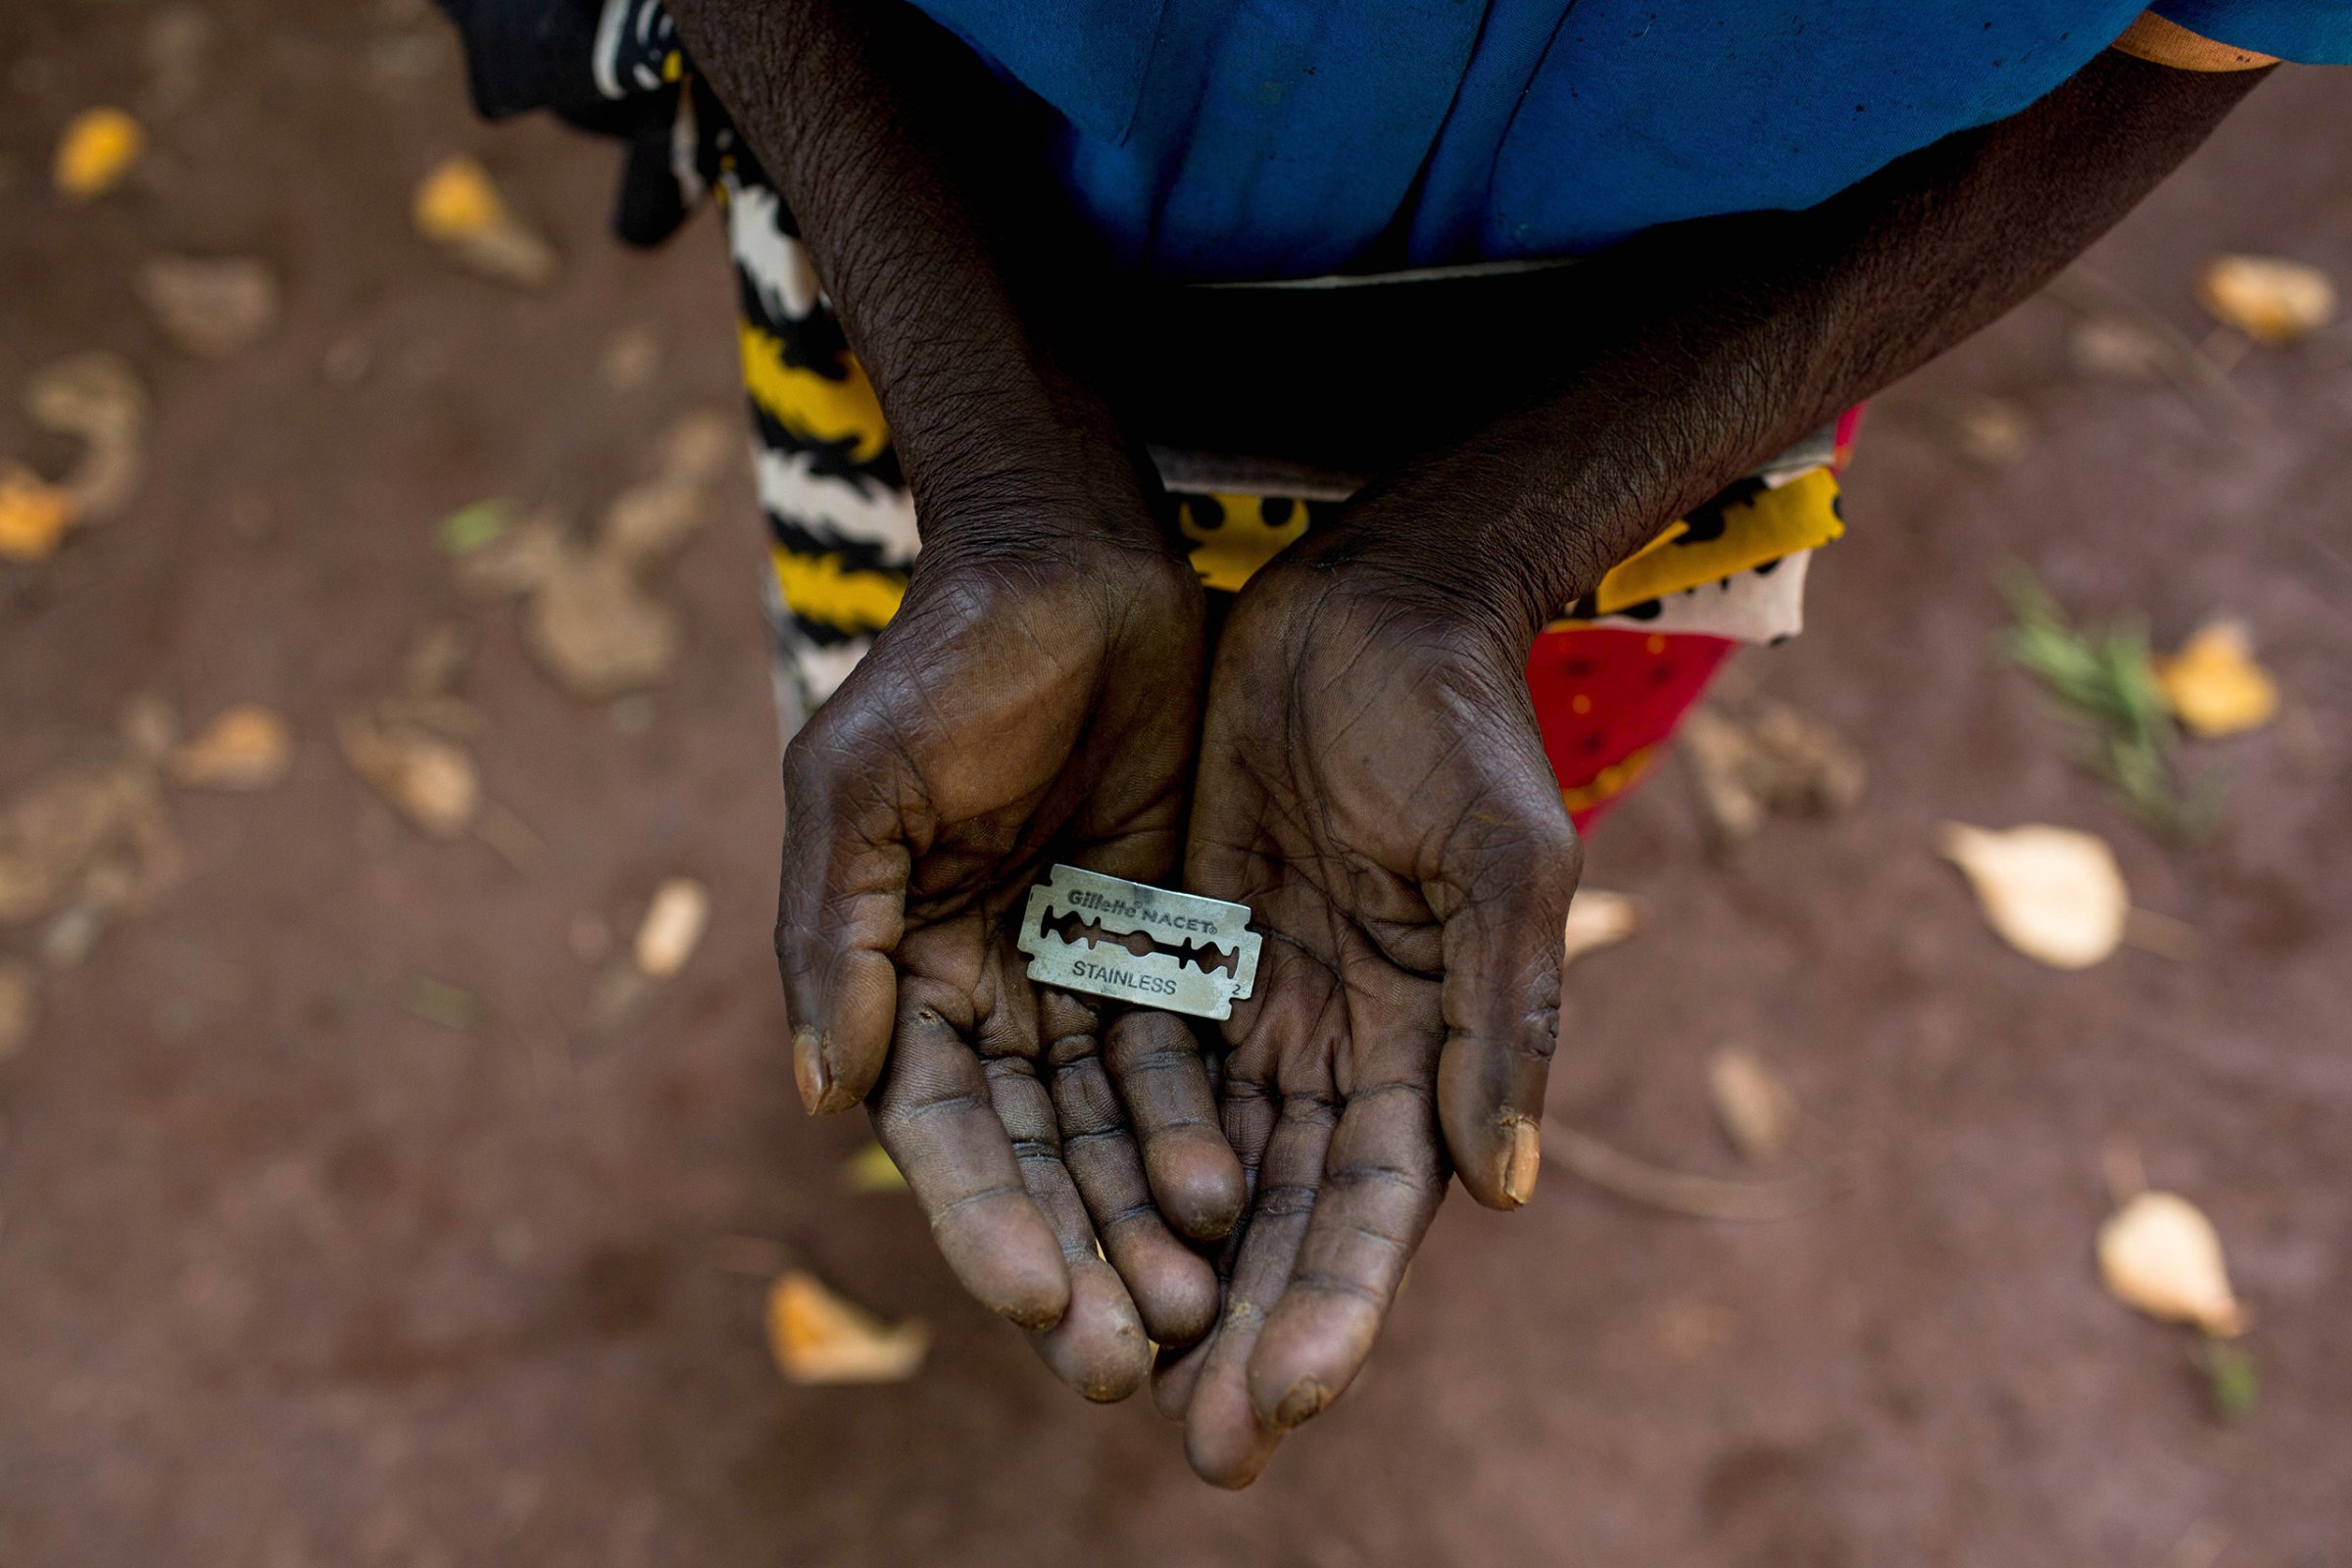 A woman shows the razor blade that she uses to cut girls' genitals in Mombasa, Kenya, June 25, 2015.